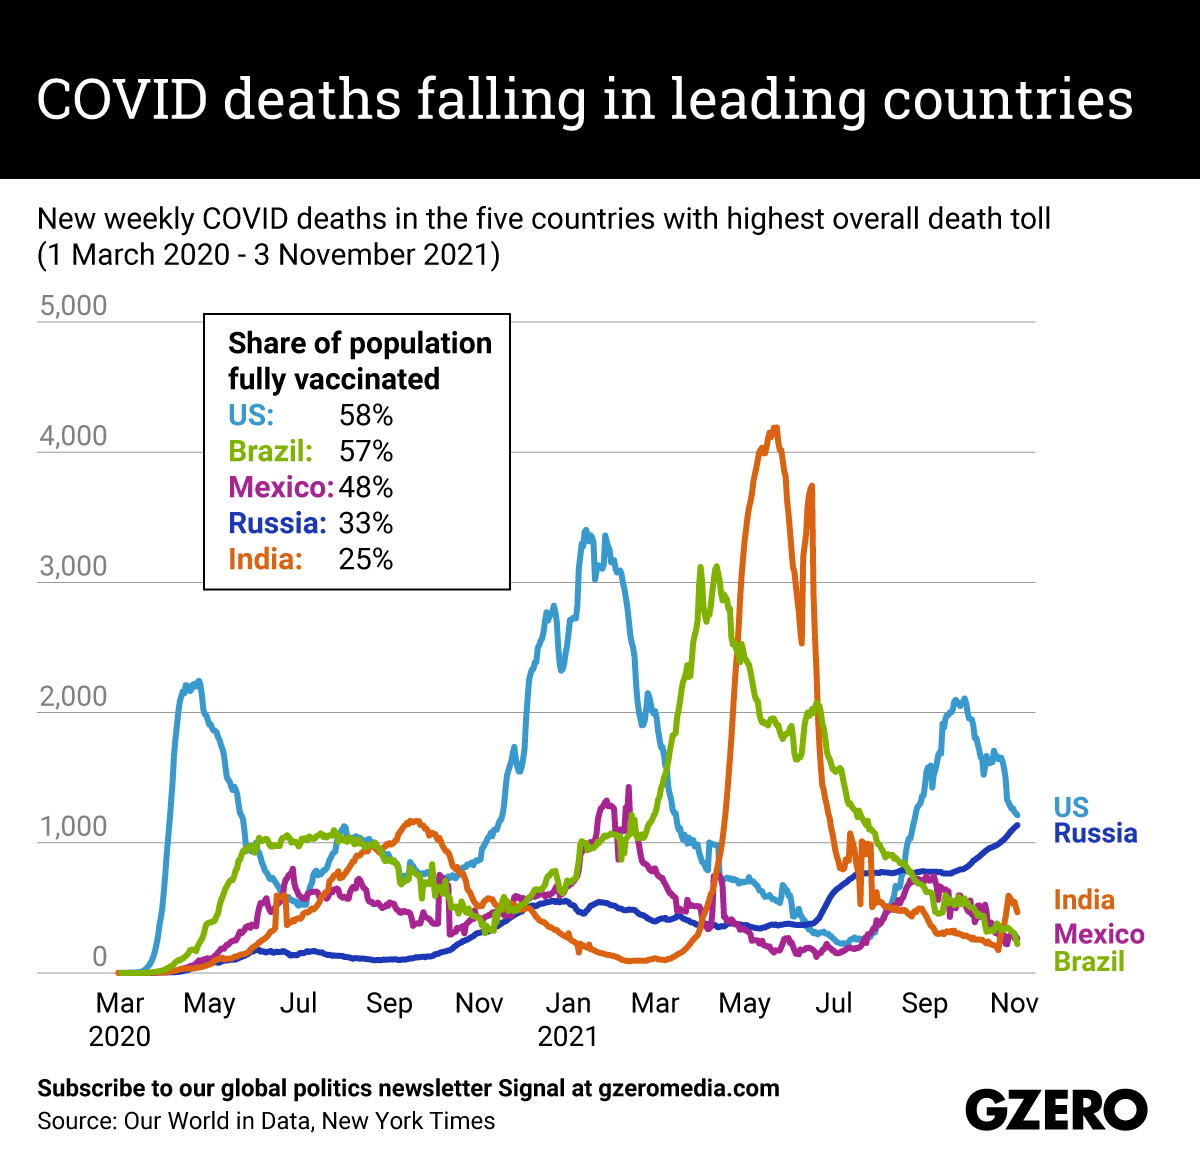 New weekly COVID deaths in the five countries with highest overall death toll (1 March 2020 3 November 2021)